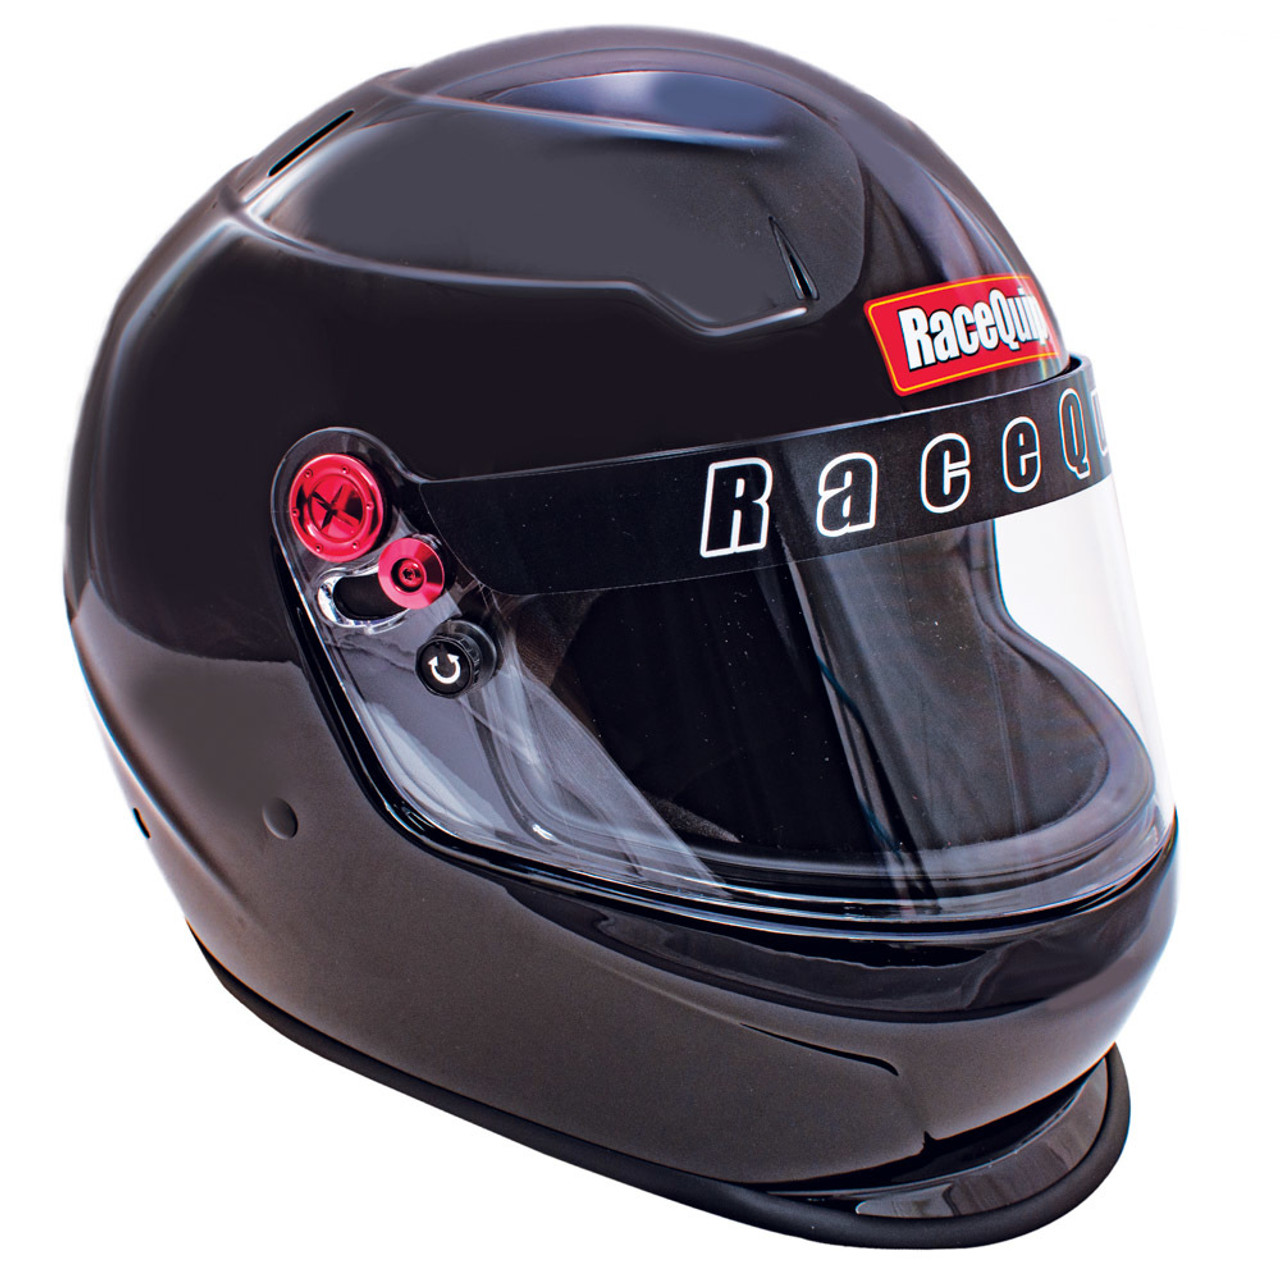 RQP276005, Helmet, Pro20, Full Face, Snell SA 2020, Head and Neck Support Ready, Black, Large, Each